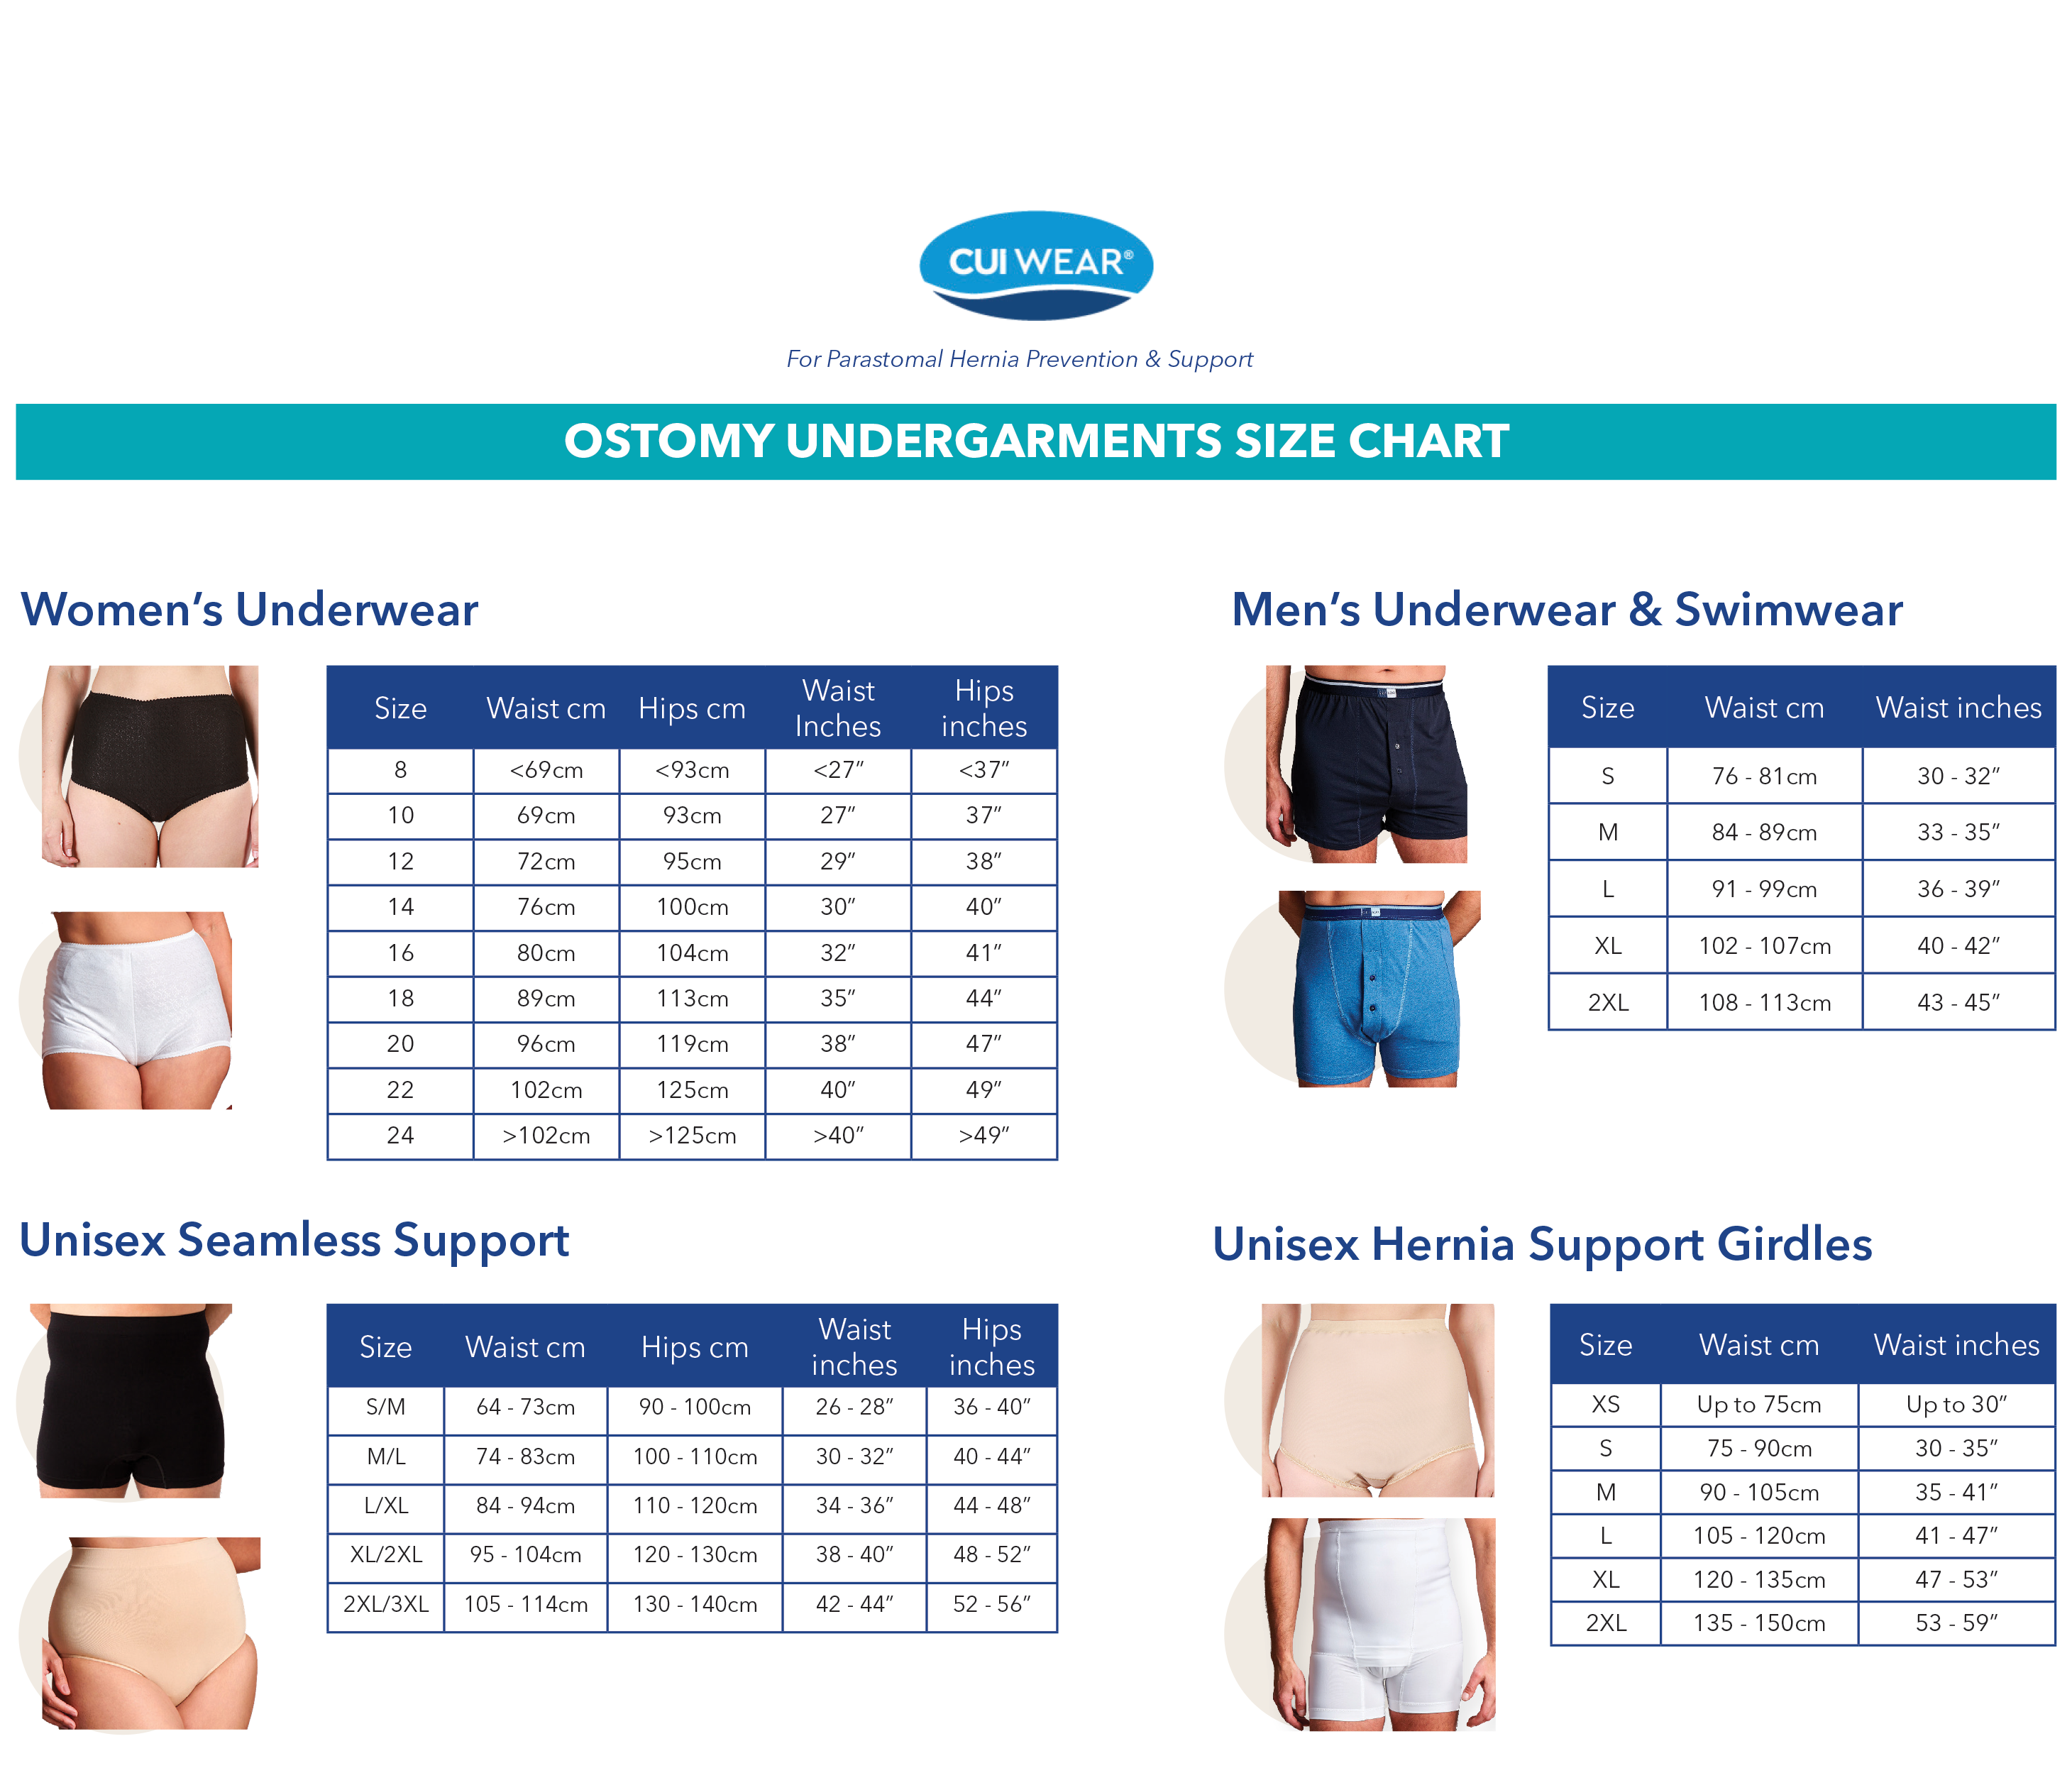 CUI Mens Hernia Low Waist Support Girdle With Legs - 1 each, XLARGE, WHITE - 0